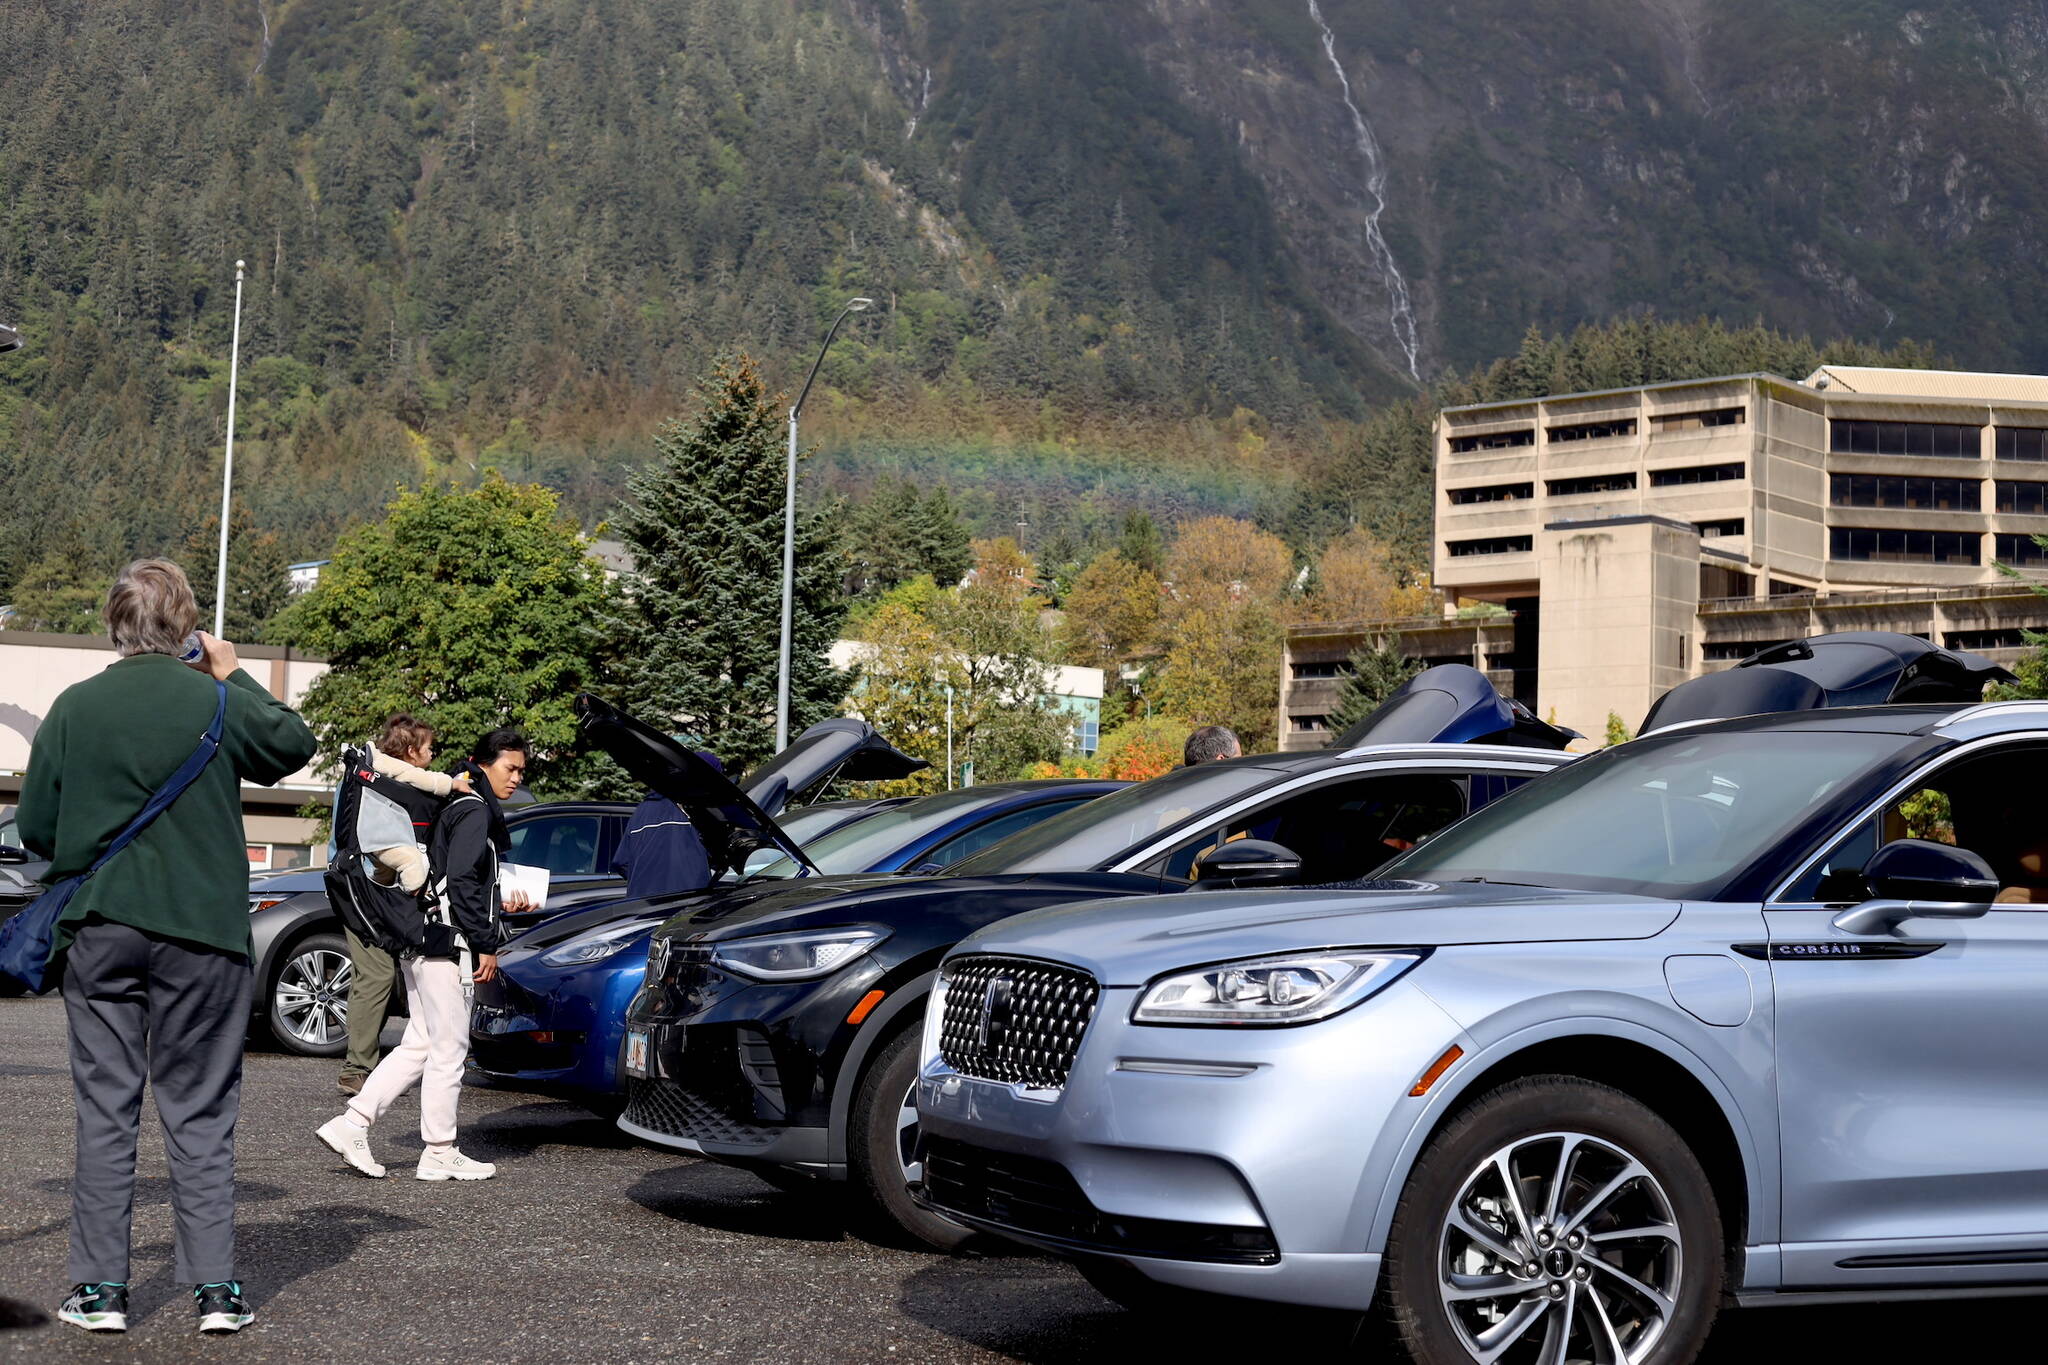 A rainbow appears over downtown as residents check out rows of electric vehicles at Juneau’s EV & E-bike Roundup Saturday afternoon. (Clarise Larson / Juneau Empire)